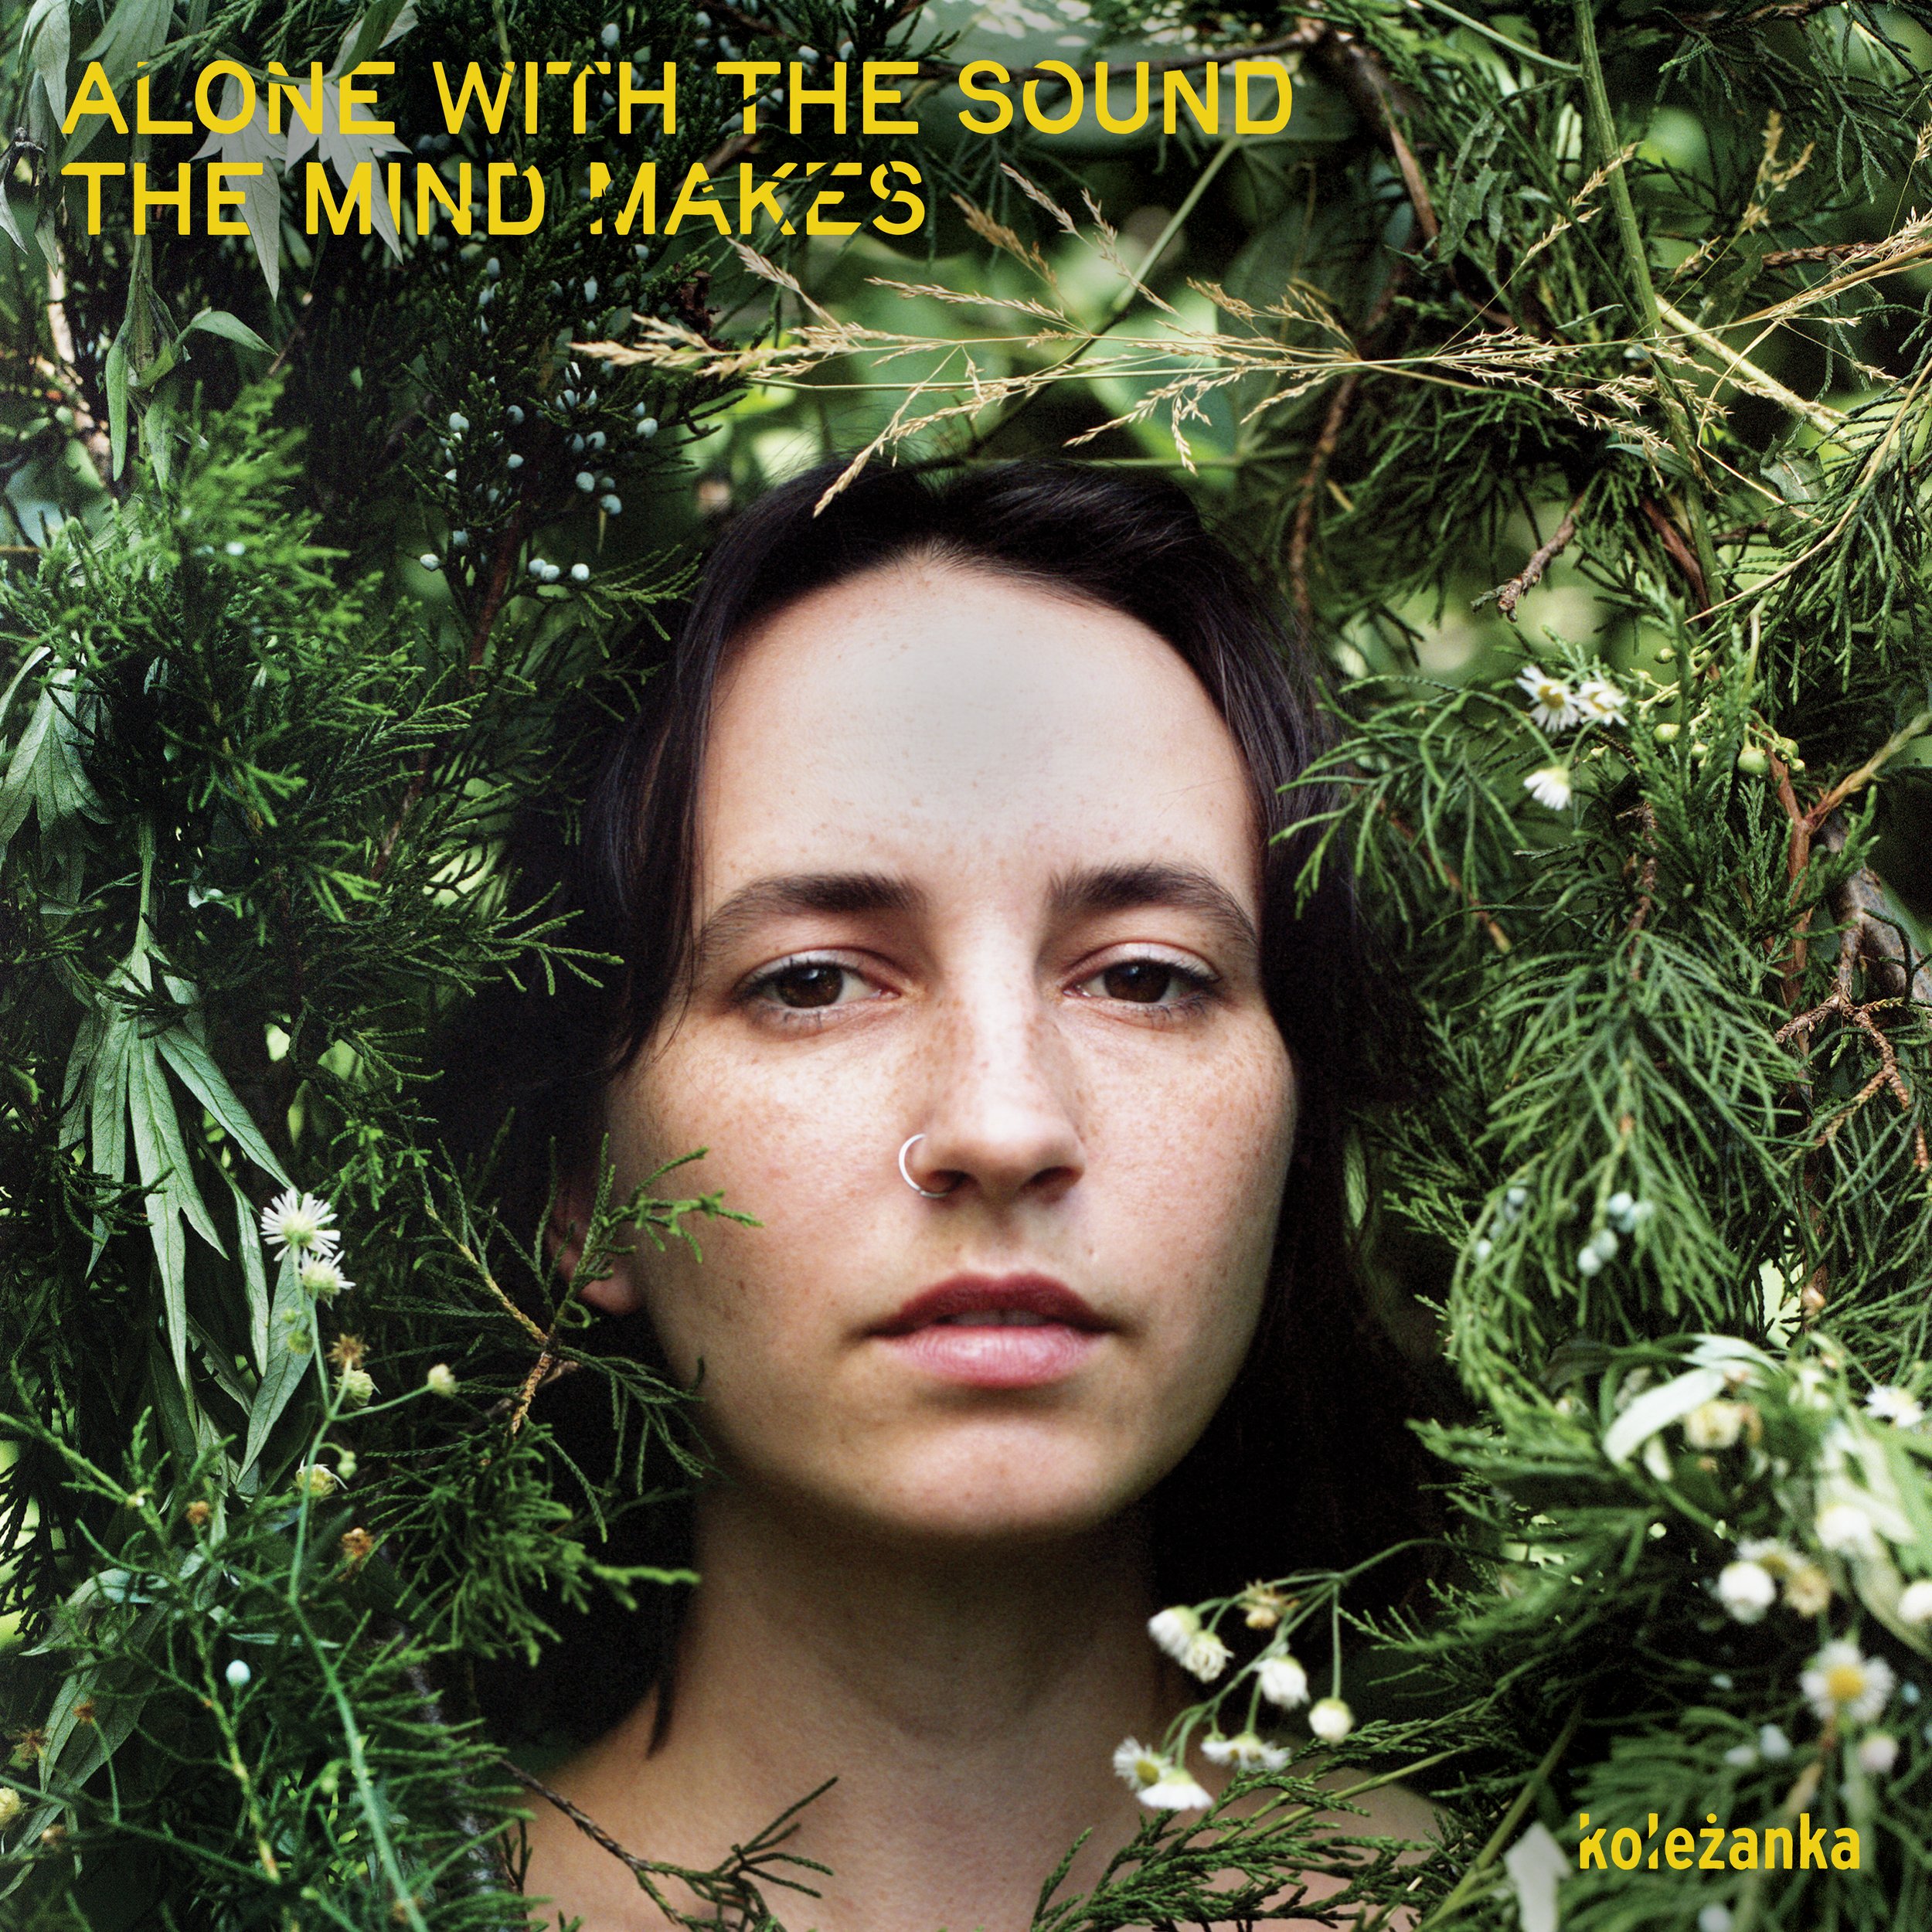 New Music from Koleżanka "Alone with the Sound the Mind Makes"